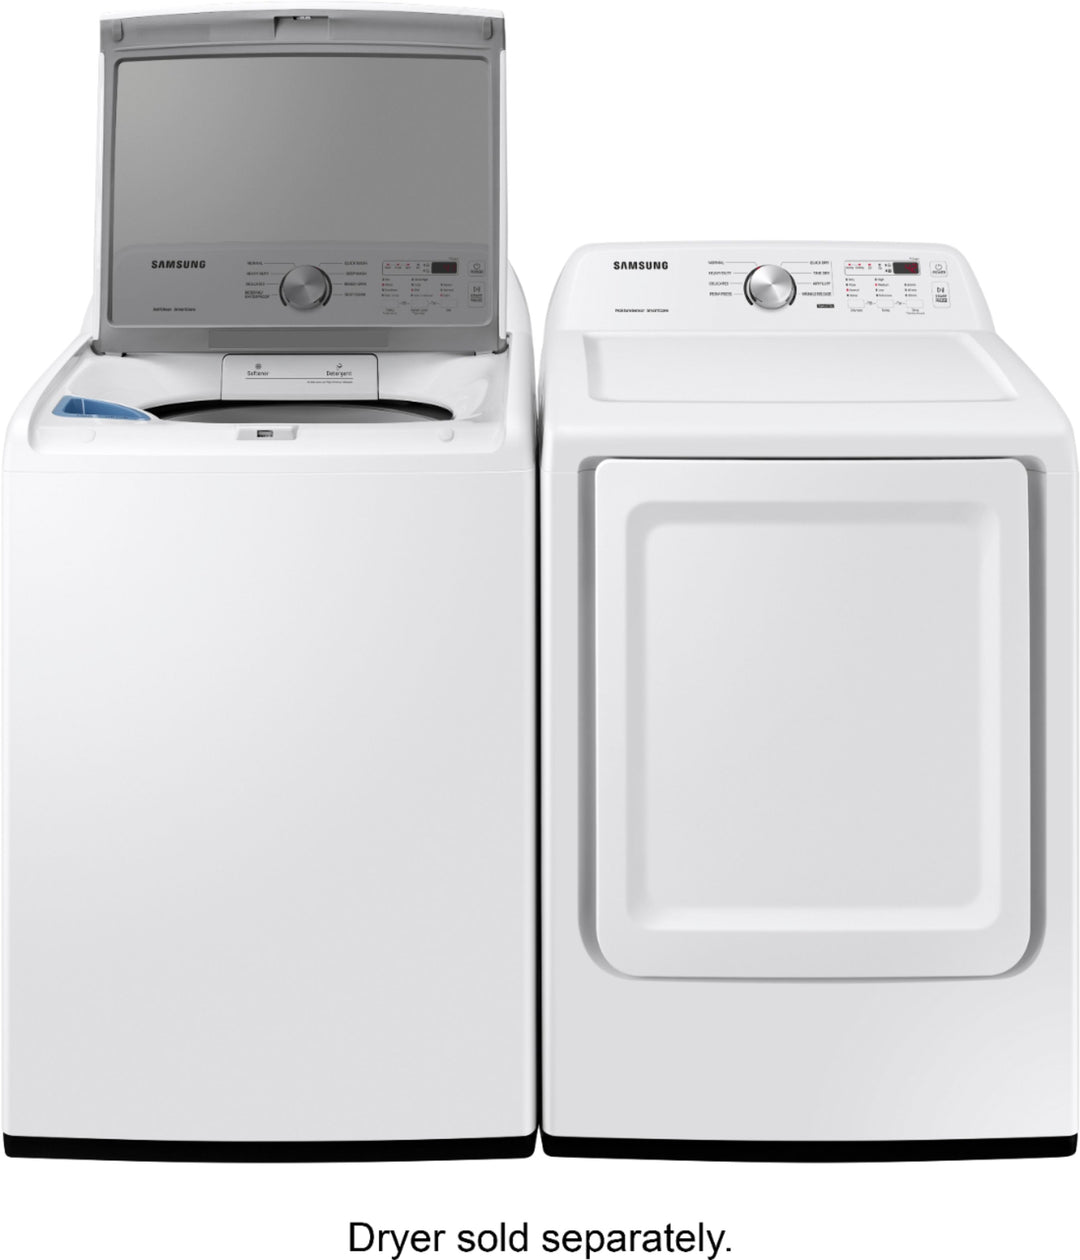 Samsung - 4.5 Cu. Ft. High Efficiency Top Load Washer with Vibration Reduction Technology+ - White_8